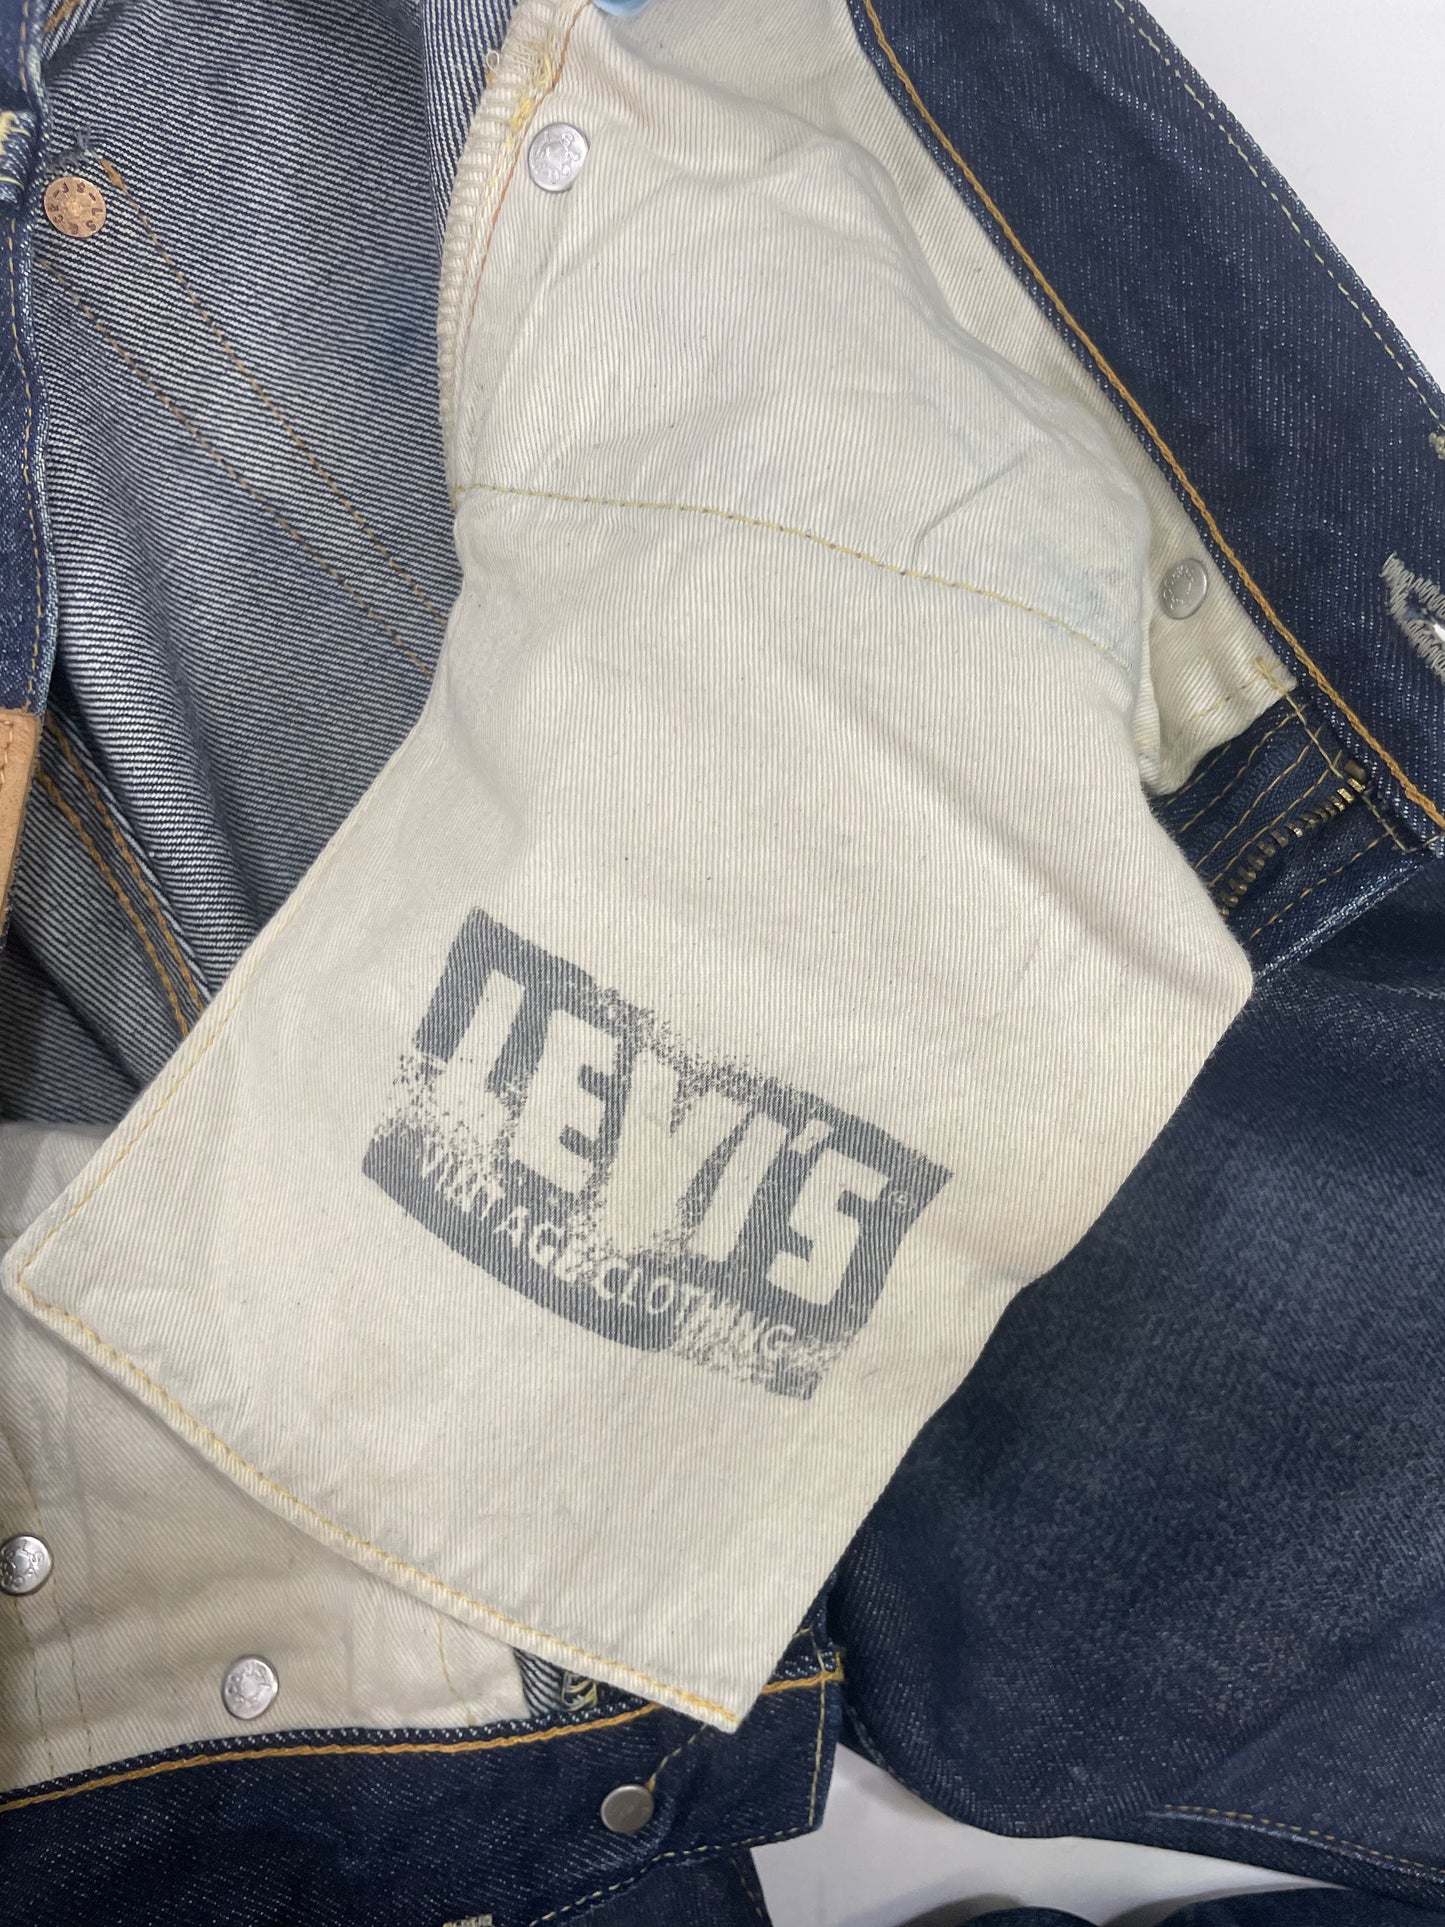 Levi's 501 ZXX Big E with Selvage